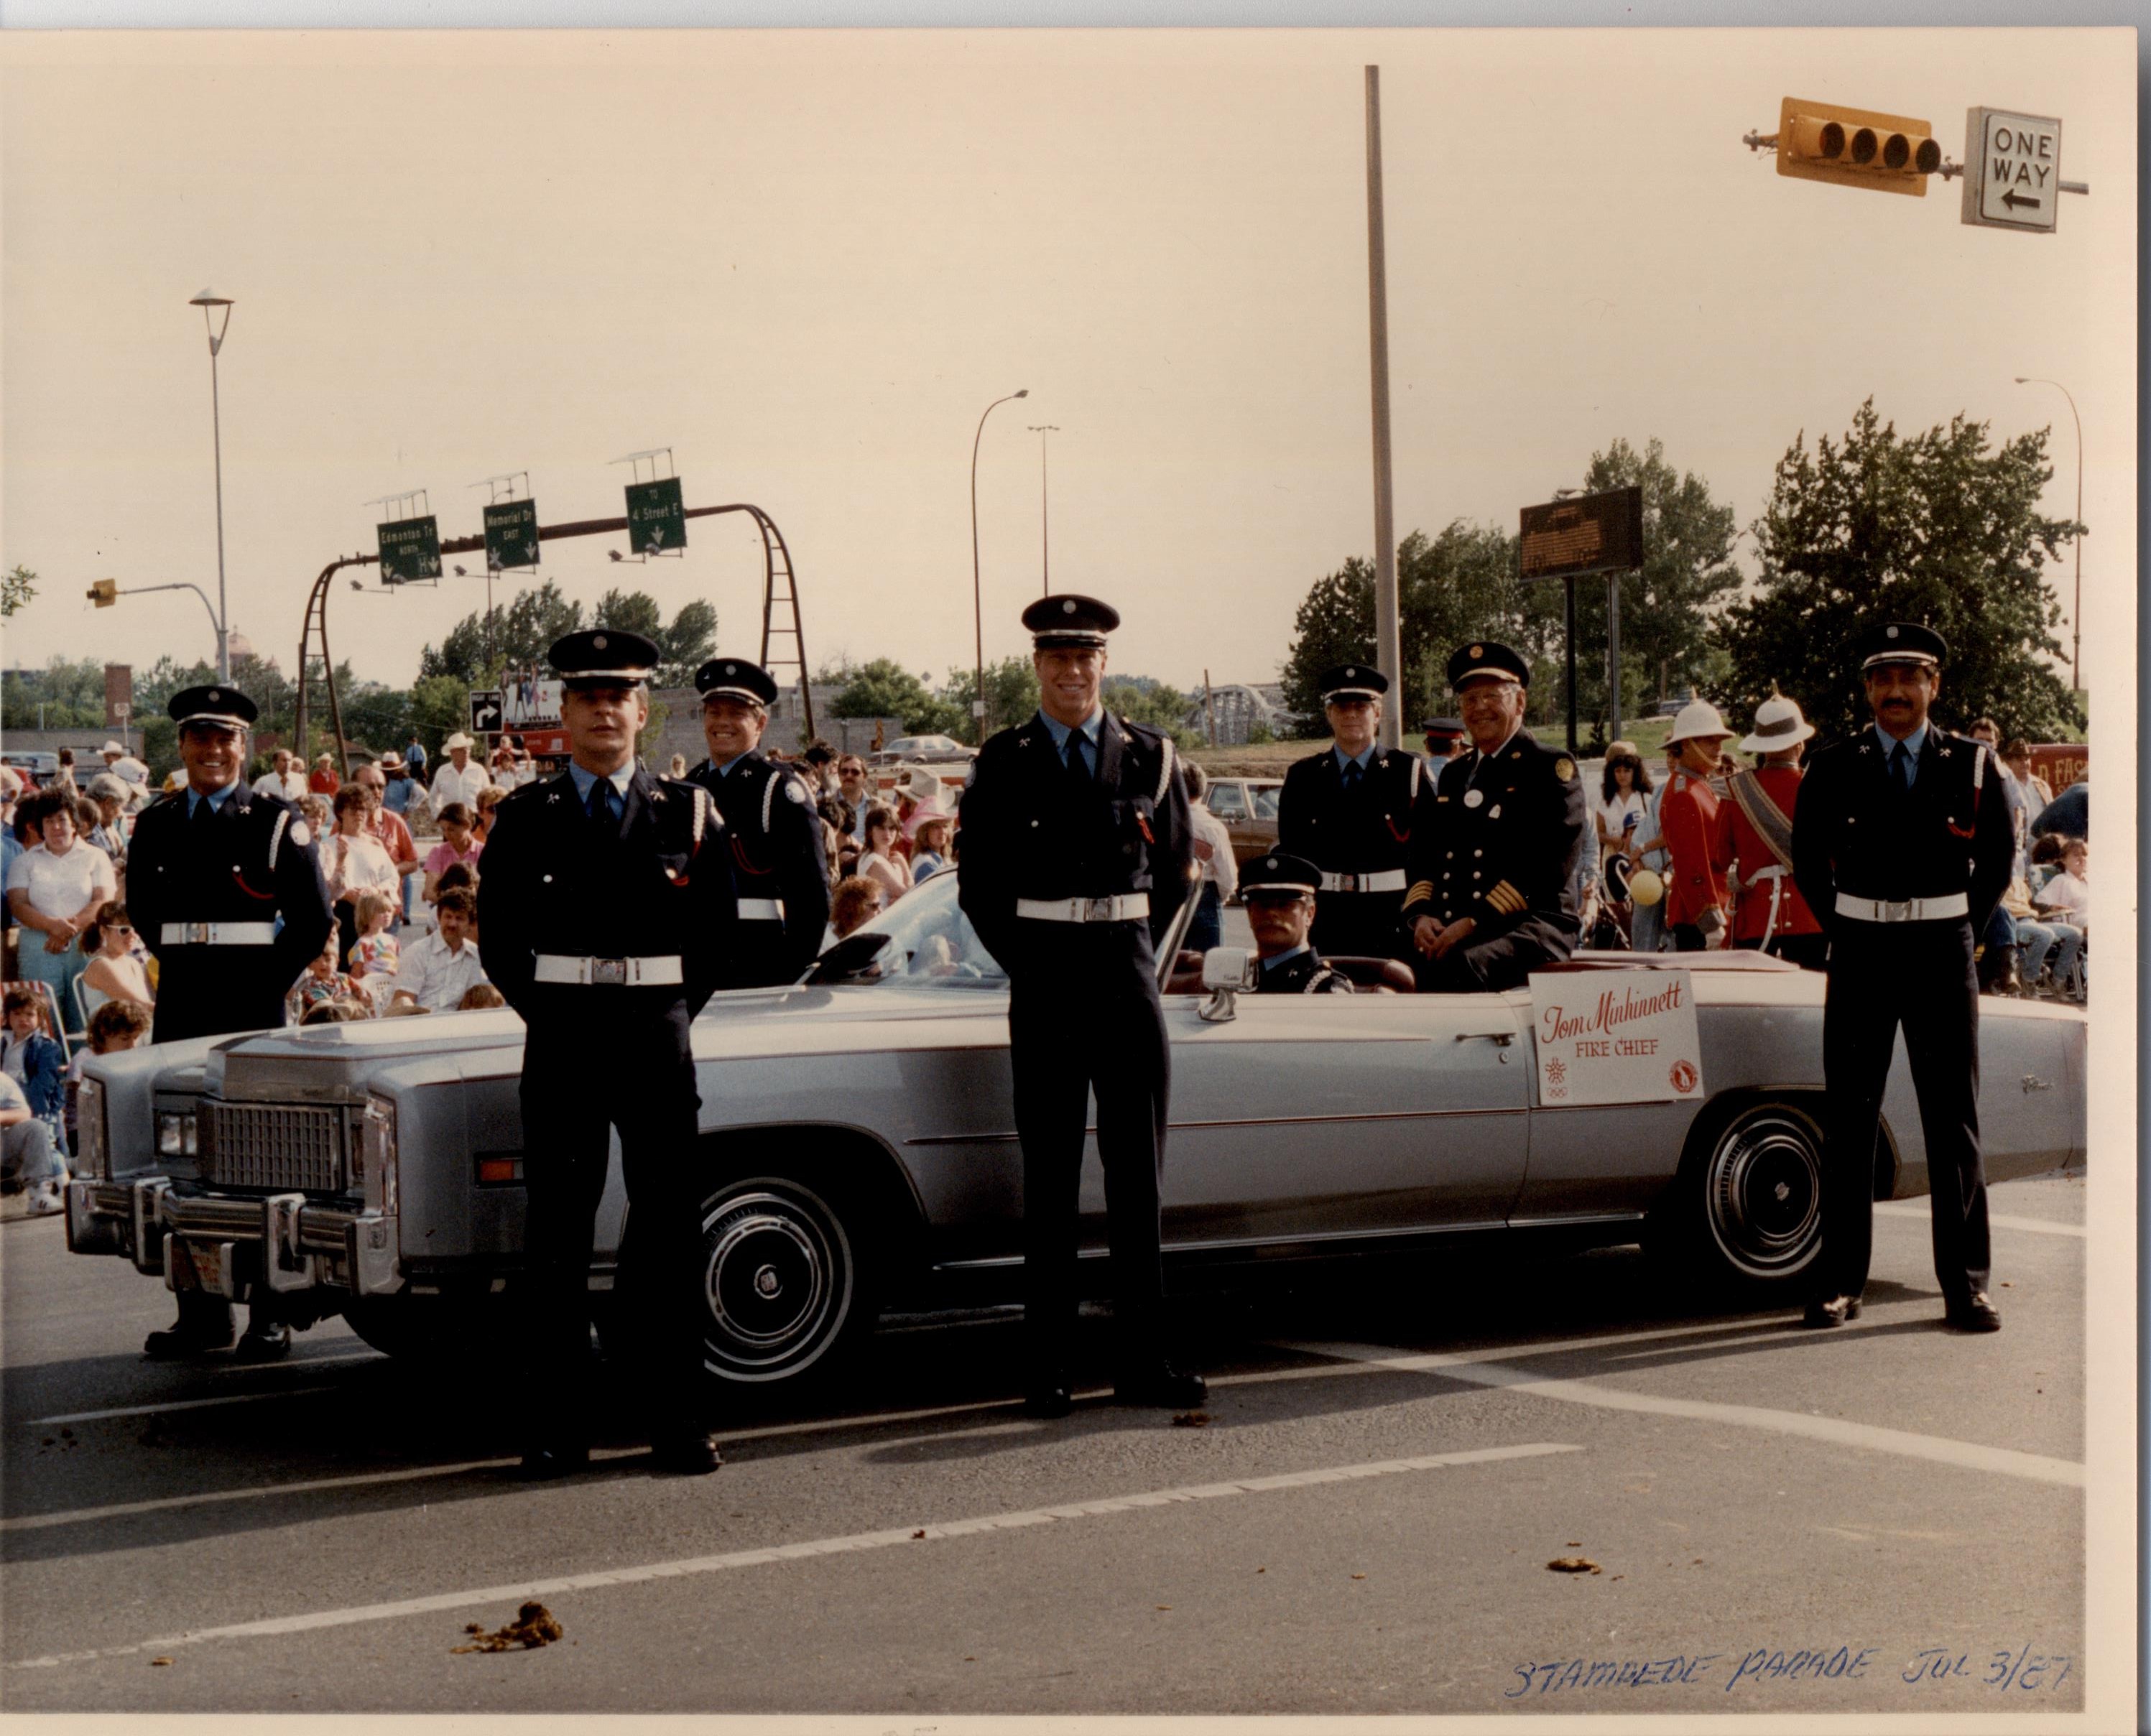 Six Honour Guard members are standing around a convertible with sitting Fire Chief. In the background are parade goers lining the street.